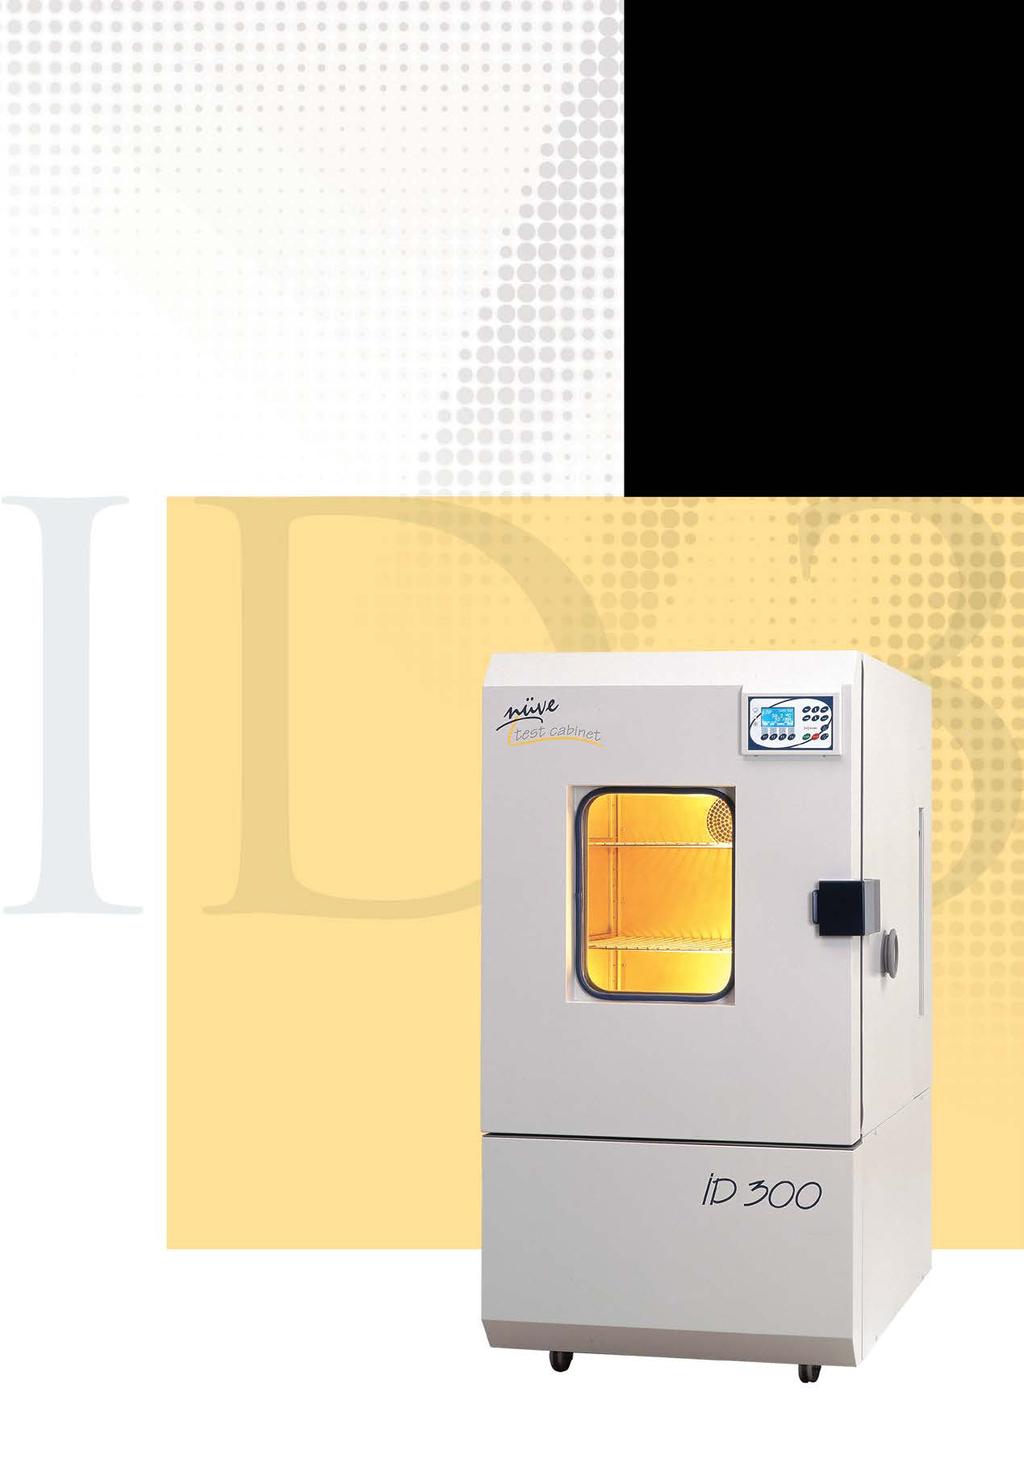 ID 300 CLIMATIC TEST CABINET Ideal design for the tests at different climatic conditions and stability, artificial aging and storage tests in industries such as electronic, automobile, automobile